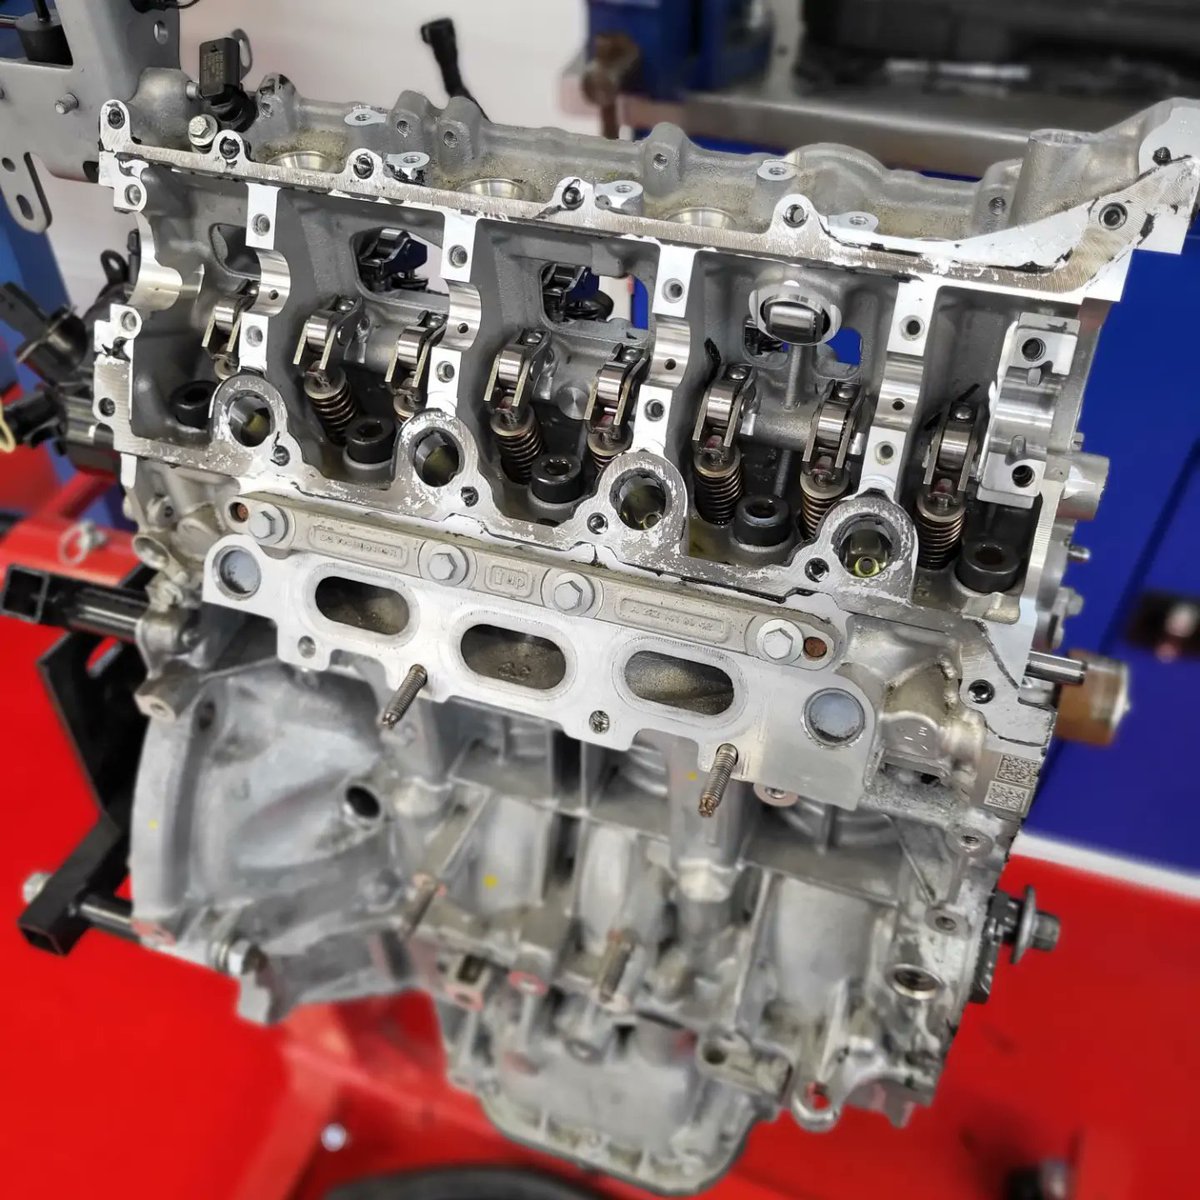 Another busy week for my @coleggwent #CrosskeysCampus #automotiveengineering learners. 

This week, they had the opportunity to work on these brand new @NissanUK engines to practice their @The_IMI Camshaft replacement task.